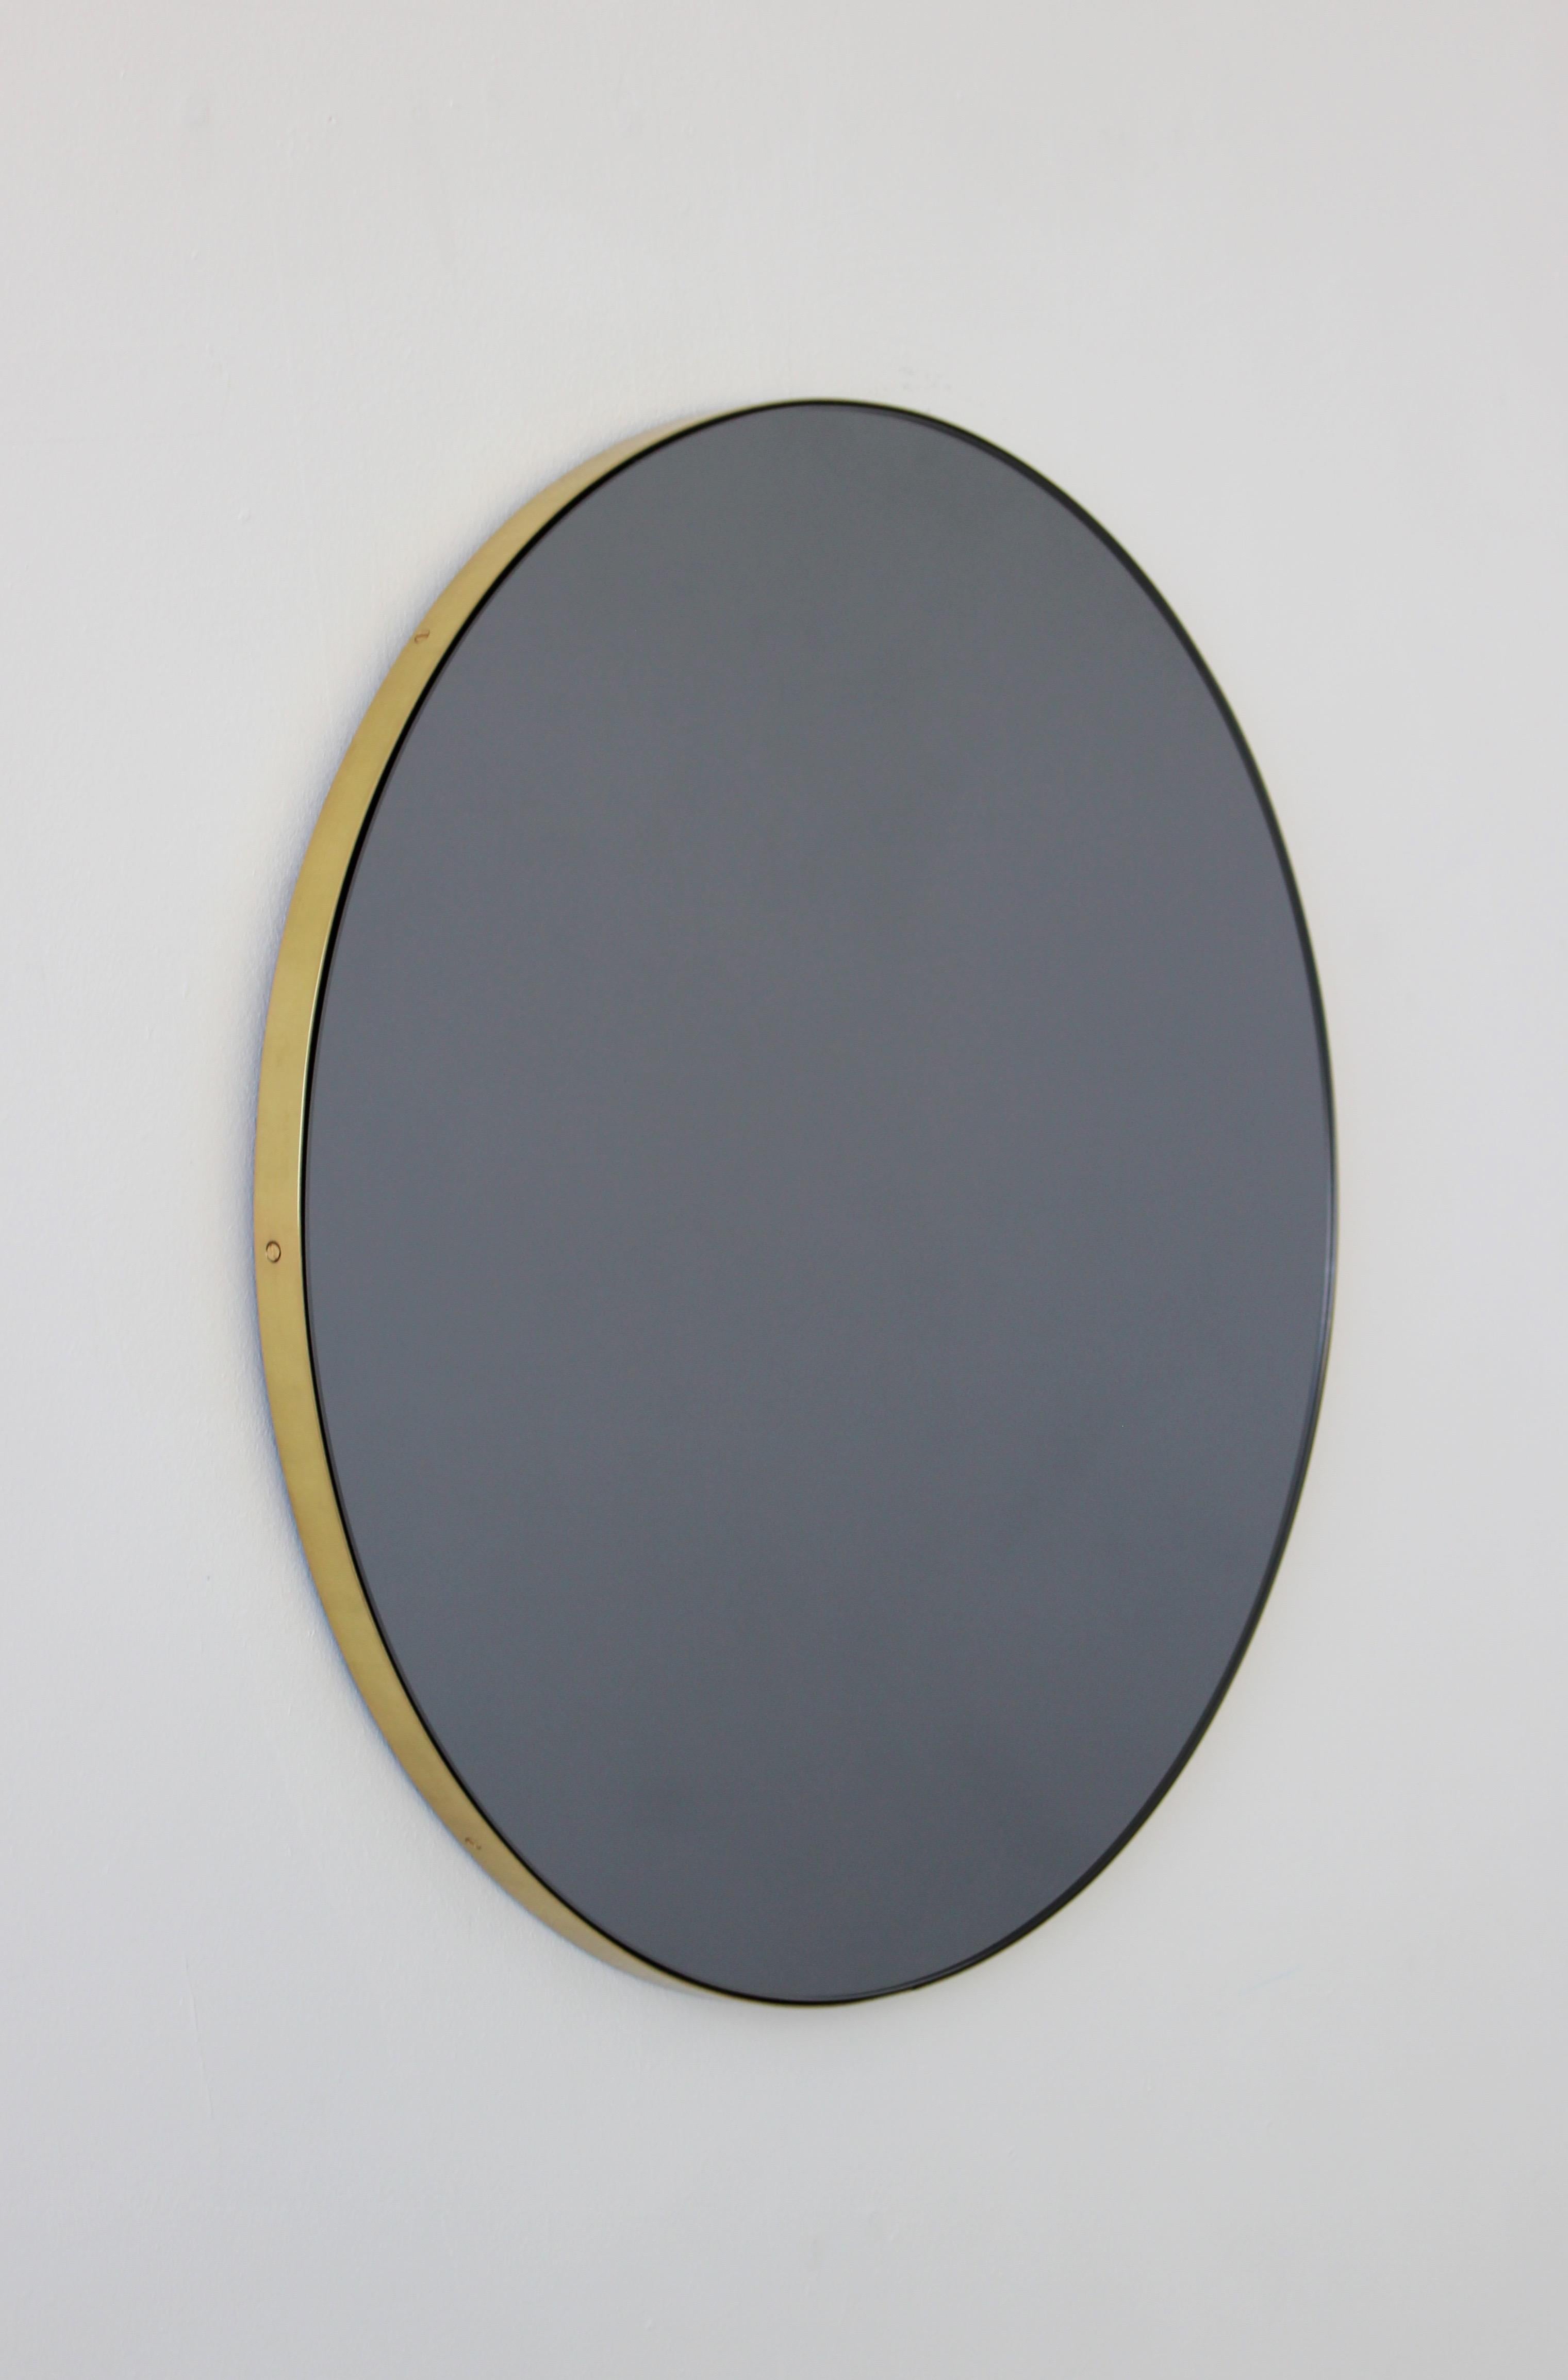 Orbis Black Tinted Round Contemporary Mirror with a Brass Frame, Medium For Sale 2